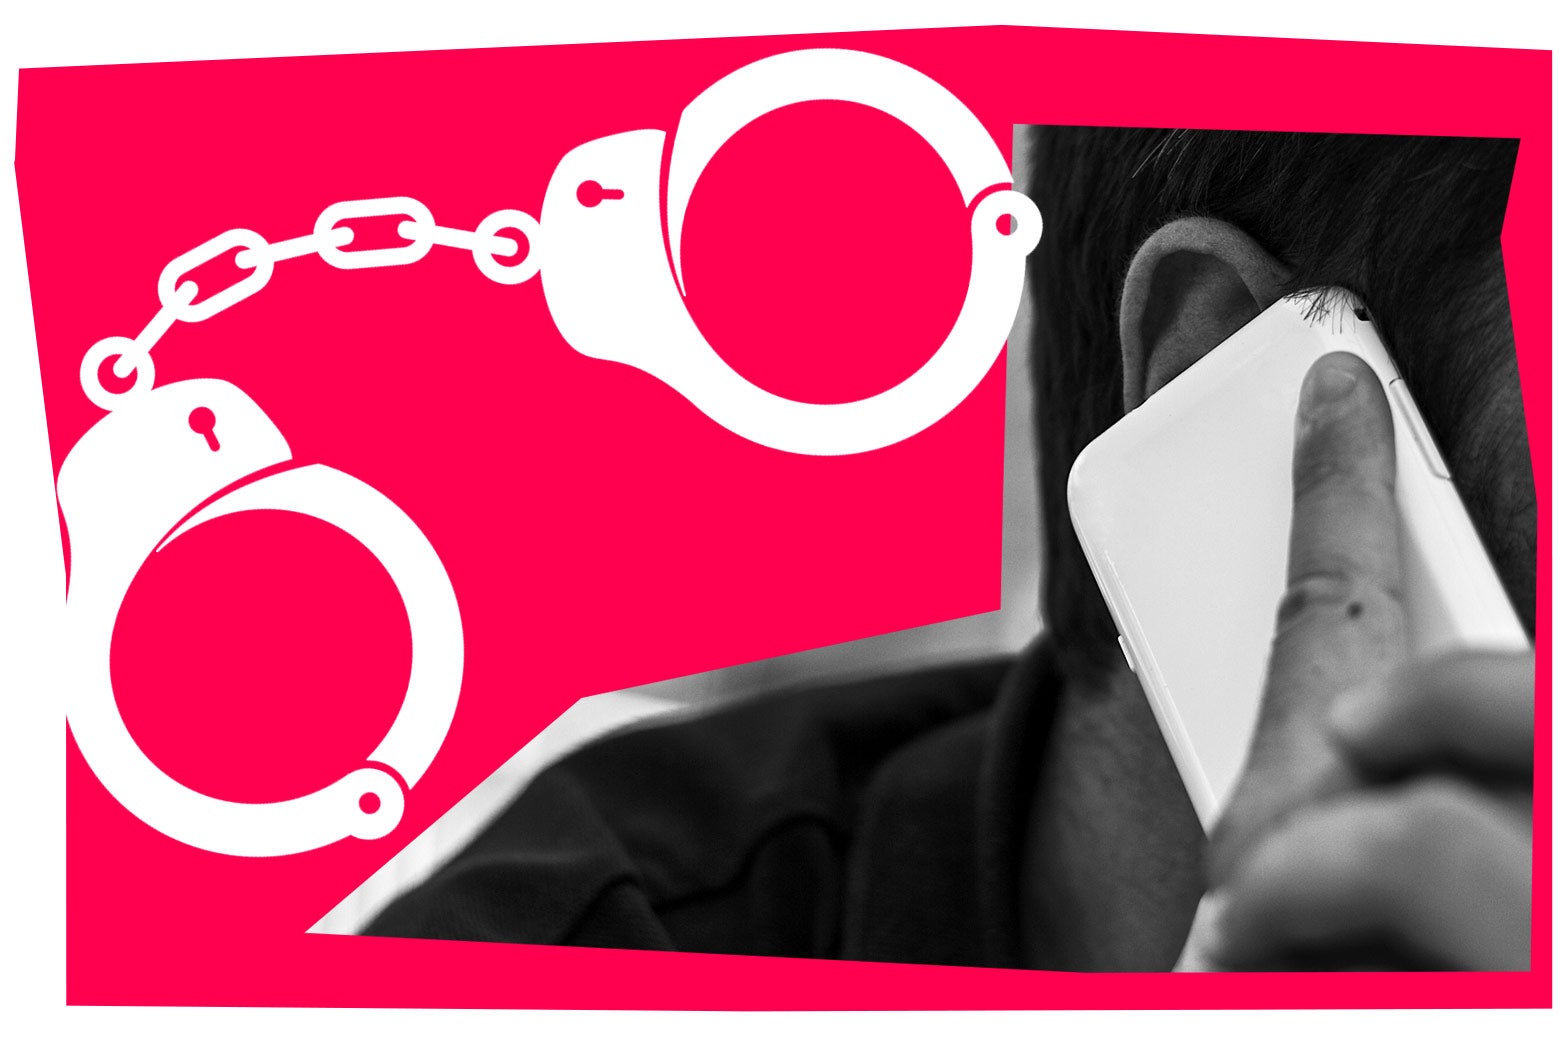 A man is seen putting his phone to his ear, next to a graphic of handcuffs.